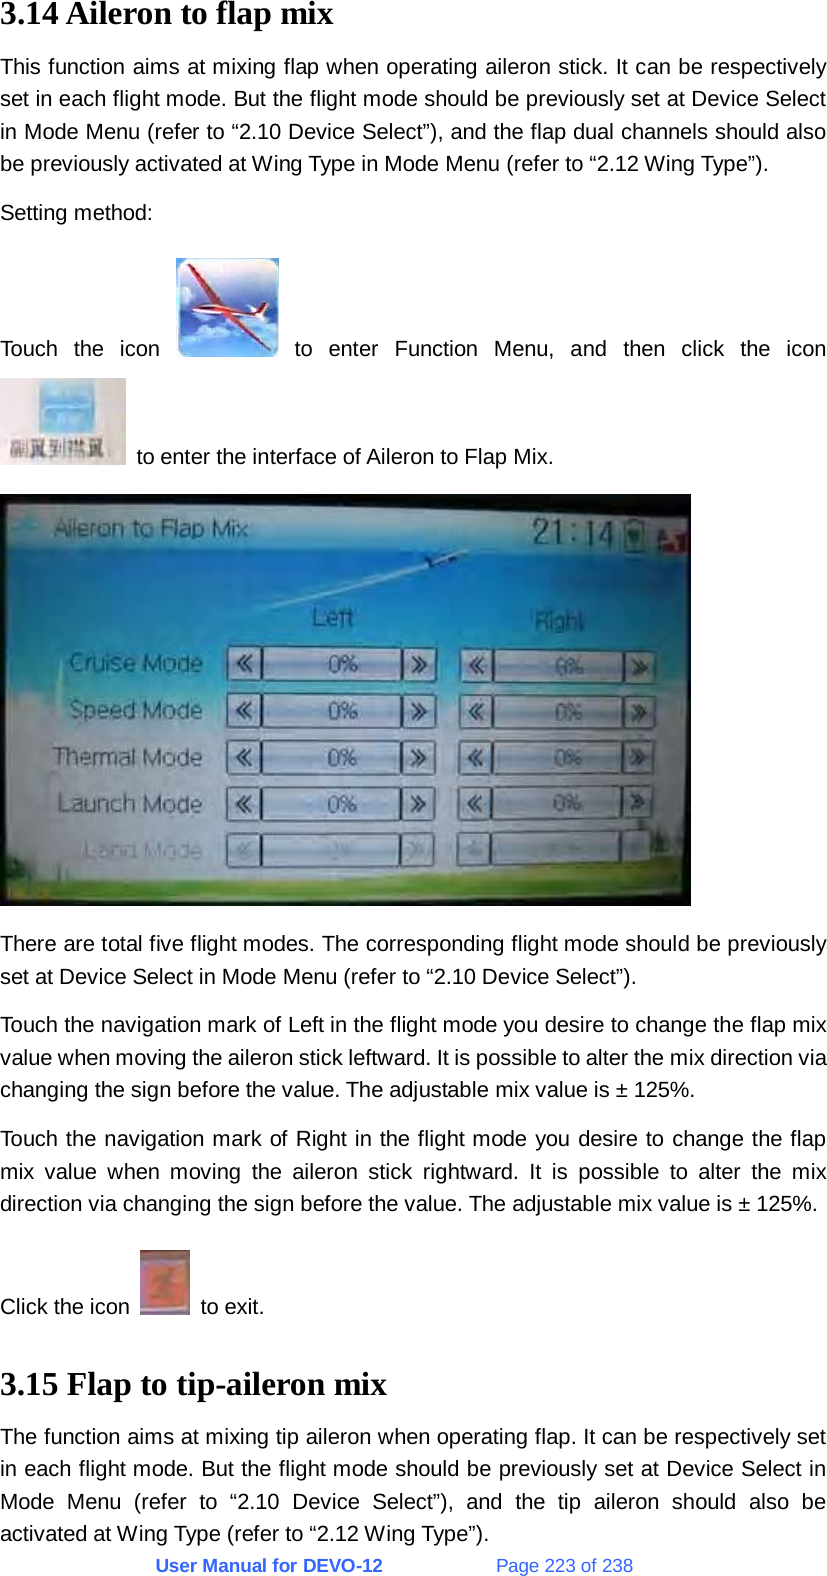 User Manual for DEVO-12             Page 223 of 238 3.14 Aileron to flap mix This function aims at mixing flap when operating aileron stick. It can be respectively set in each flight mode. But the flight mode should be previously set at Device Select in Mode Menu (refer to “2.10 Device Select”), and the flap dual channels should also be previously activated at Wing Type in Mode Menu (refer to “2.12 Wing Type”). Setting method: Touch the icon   to enter Function Menu, and then click the icon   to enter the interface of Aileron to Flap Mix.  There are total five flight modes. The corresponding flight mode should be previously set at Device Select in Mode Menu (refer to “2.10 Device Select”). Touch the navigation mark of Left in the flight mode you desire to change the flap mix value when moving the aileron stick leftward. It is possible to alter the mix direction via changing the sign before the value. The adjustable mix value is ± 125%. Touch the navigation mark of Right in the flight mode you desire to change the flap mix value when moving the aileron stick rightward. It is possible to alter the mix direction via changing the sign before the value. The adjustable mix value is ± 125%. Click the icon   to exit. 3.15 Flap to tip-aileron mix The function aims at mixing tip aileron when operating flap. It can be respectively set in each flight mode. But the flight mode should be previously set at Device Select in Mode Menu (refer to “2.10 Device Select”), and the tip aileron should also be activated at Wing Type (refer to “2.12 Wing Type”). 